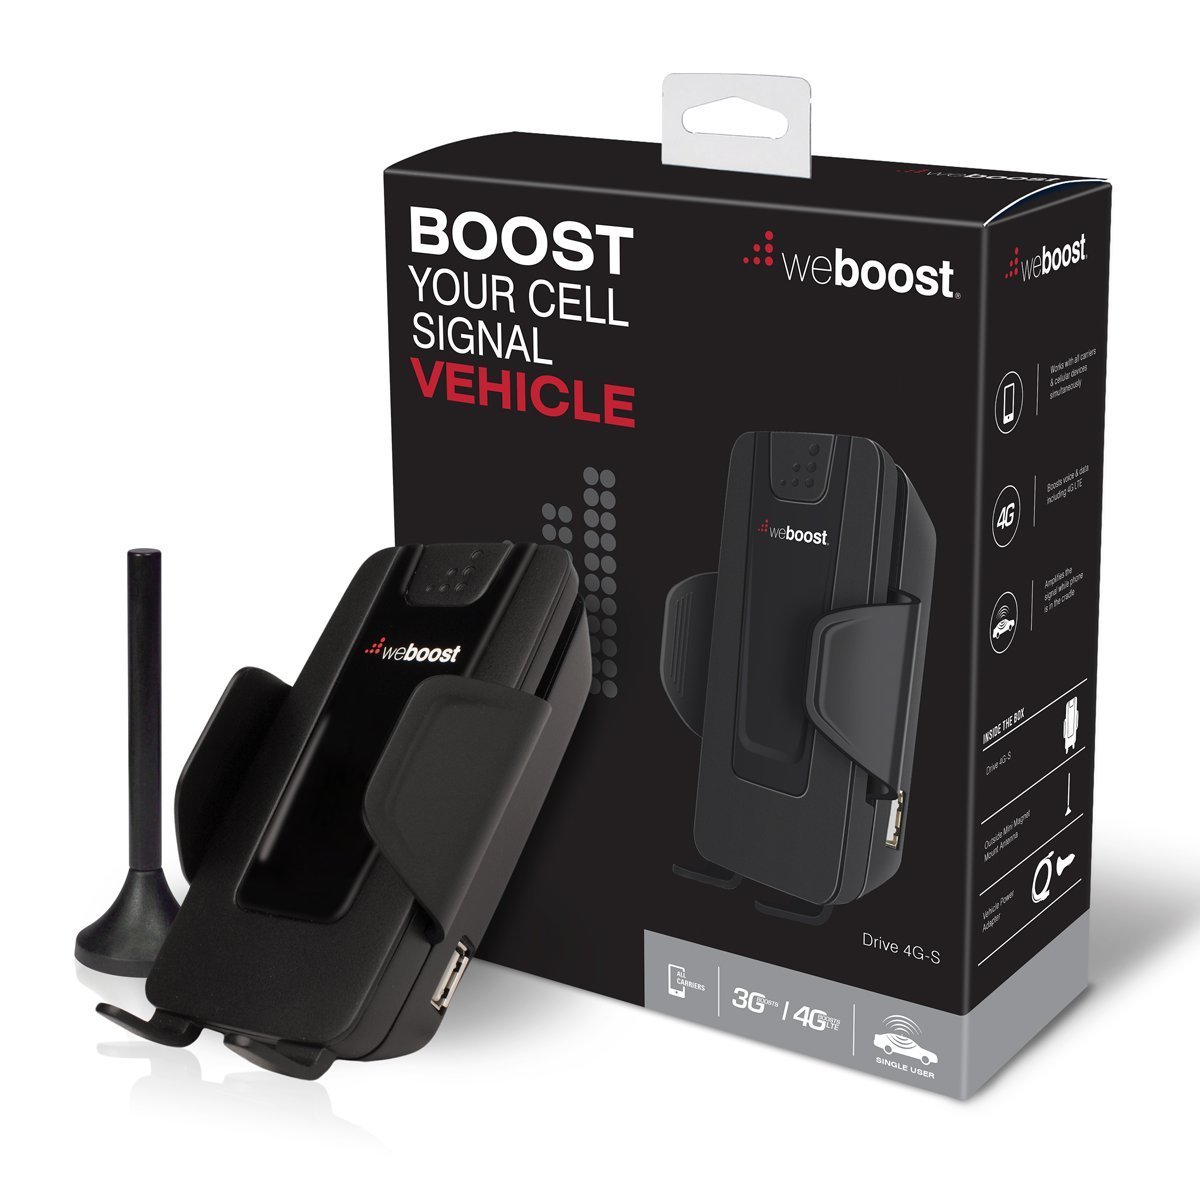 Best Cell Phone Signal Boosters Reviewed in 2021 | EarlyExperts Best Cell Phone Signal Booster For Vehicle